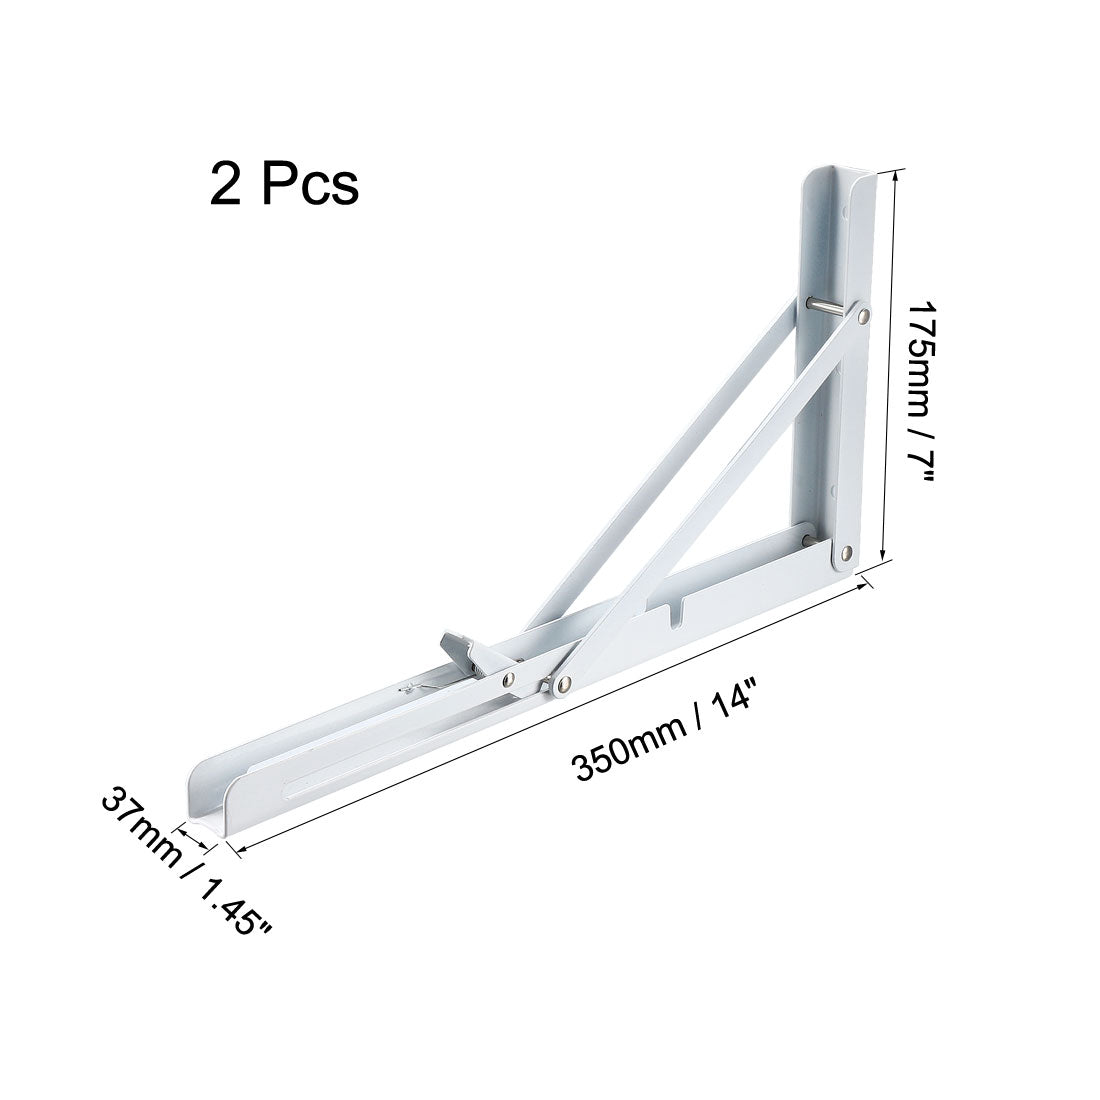 uxcell Uxcell Folding Bracket 14 inch 350mm for Shelf Table Desk Wall Mounted Support Collapsible Long Release Arm Space Saving Carbon Steel 2pcs